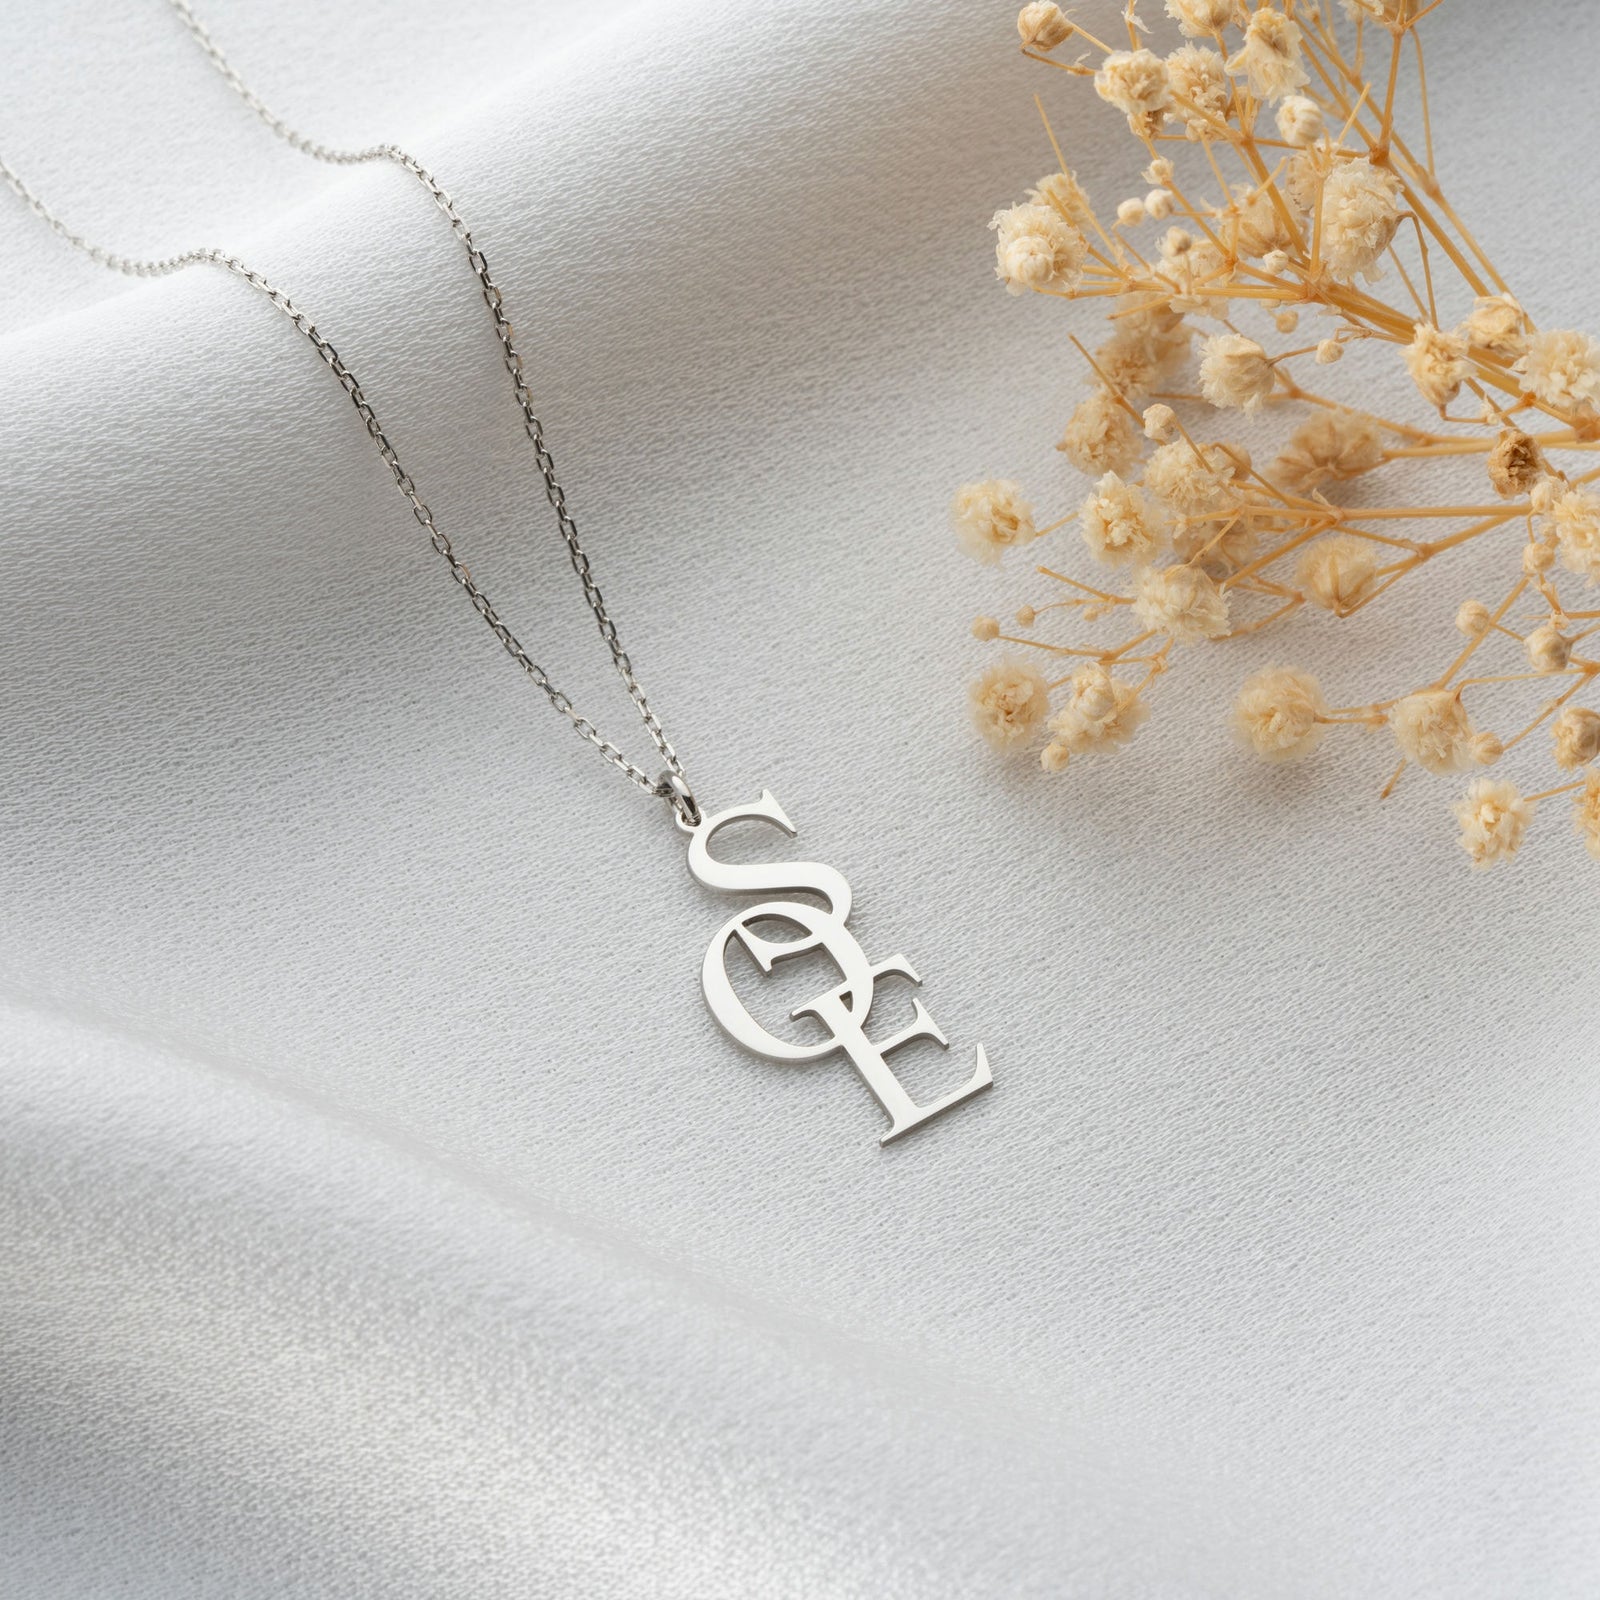 Handcrafted Vertical Initials Necklace for Your Family